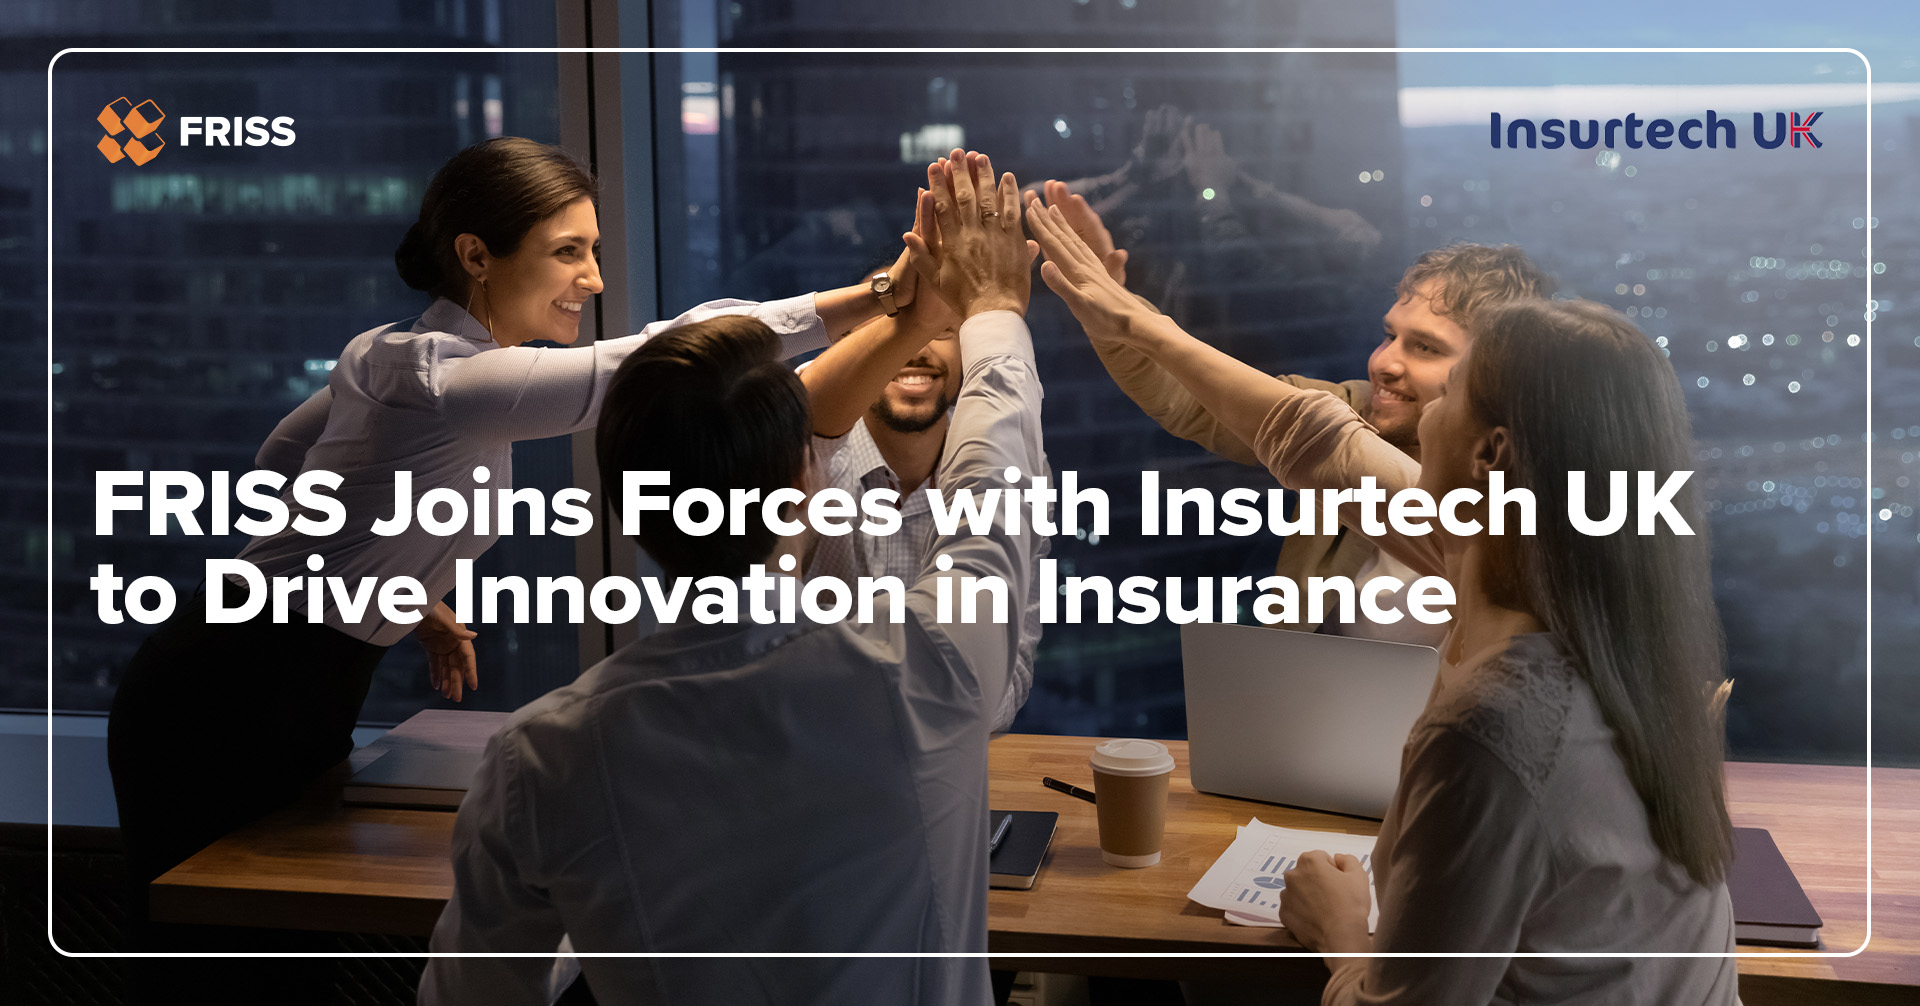 FRISS Joins Forces with Insurtech UK to Drive Innovation in Insurance